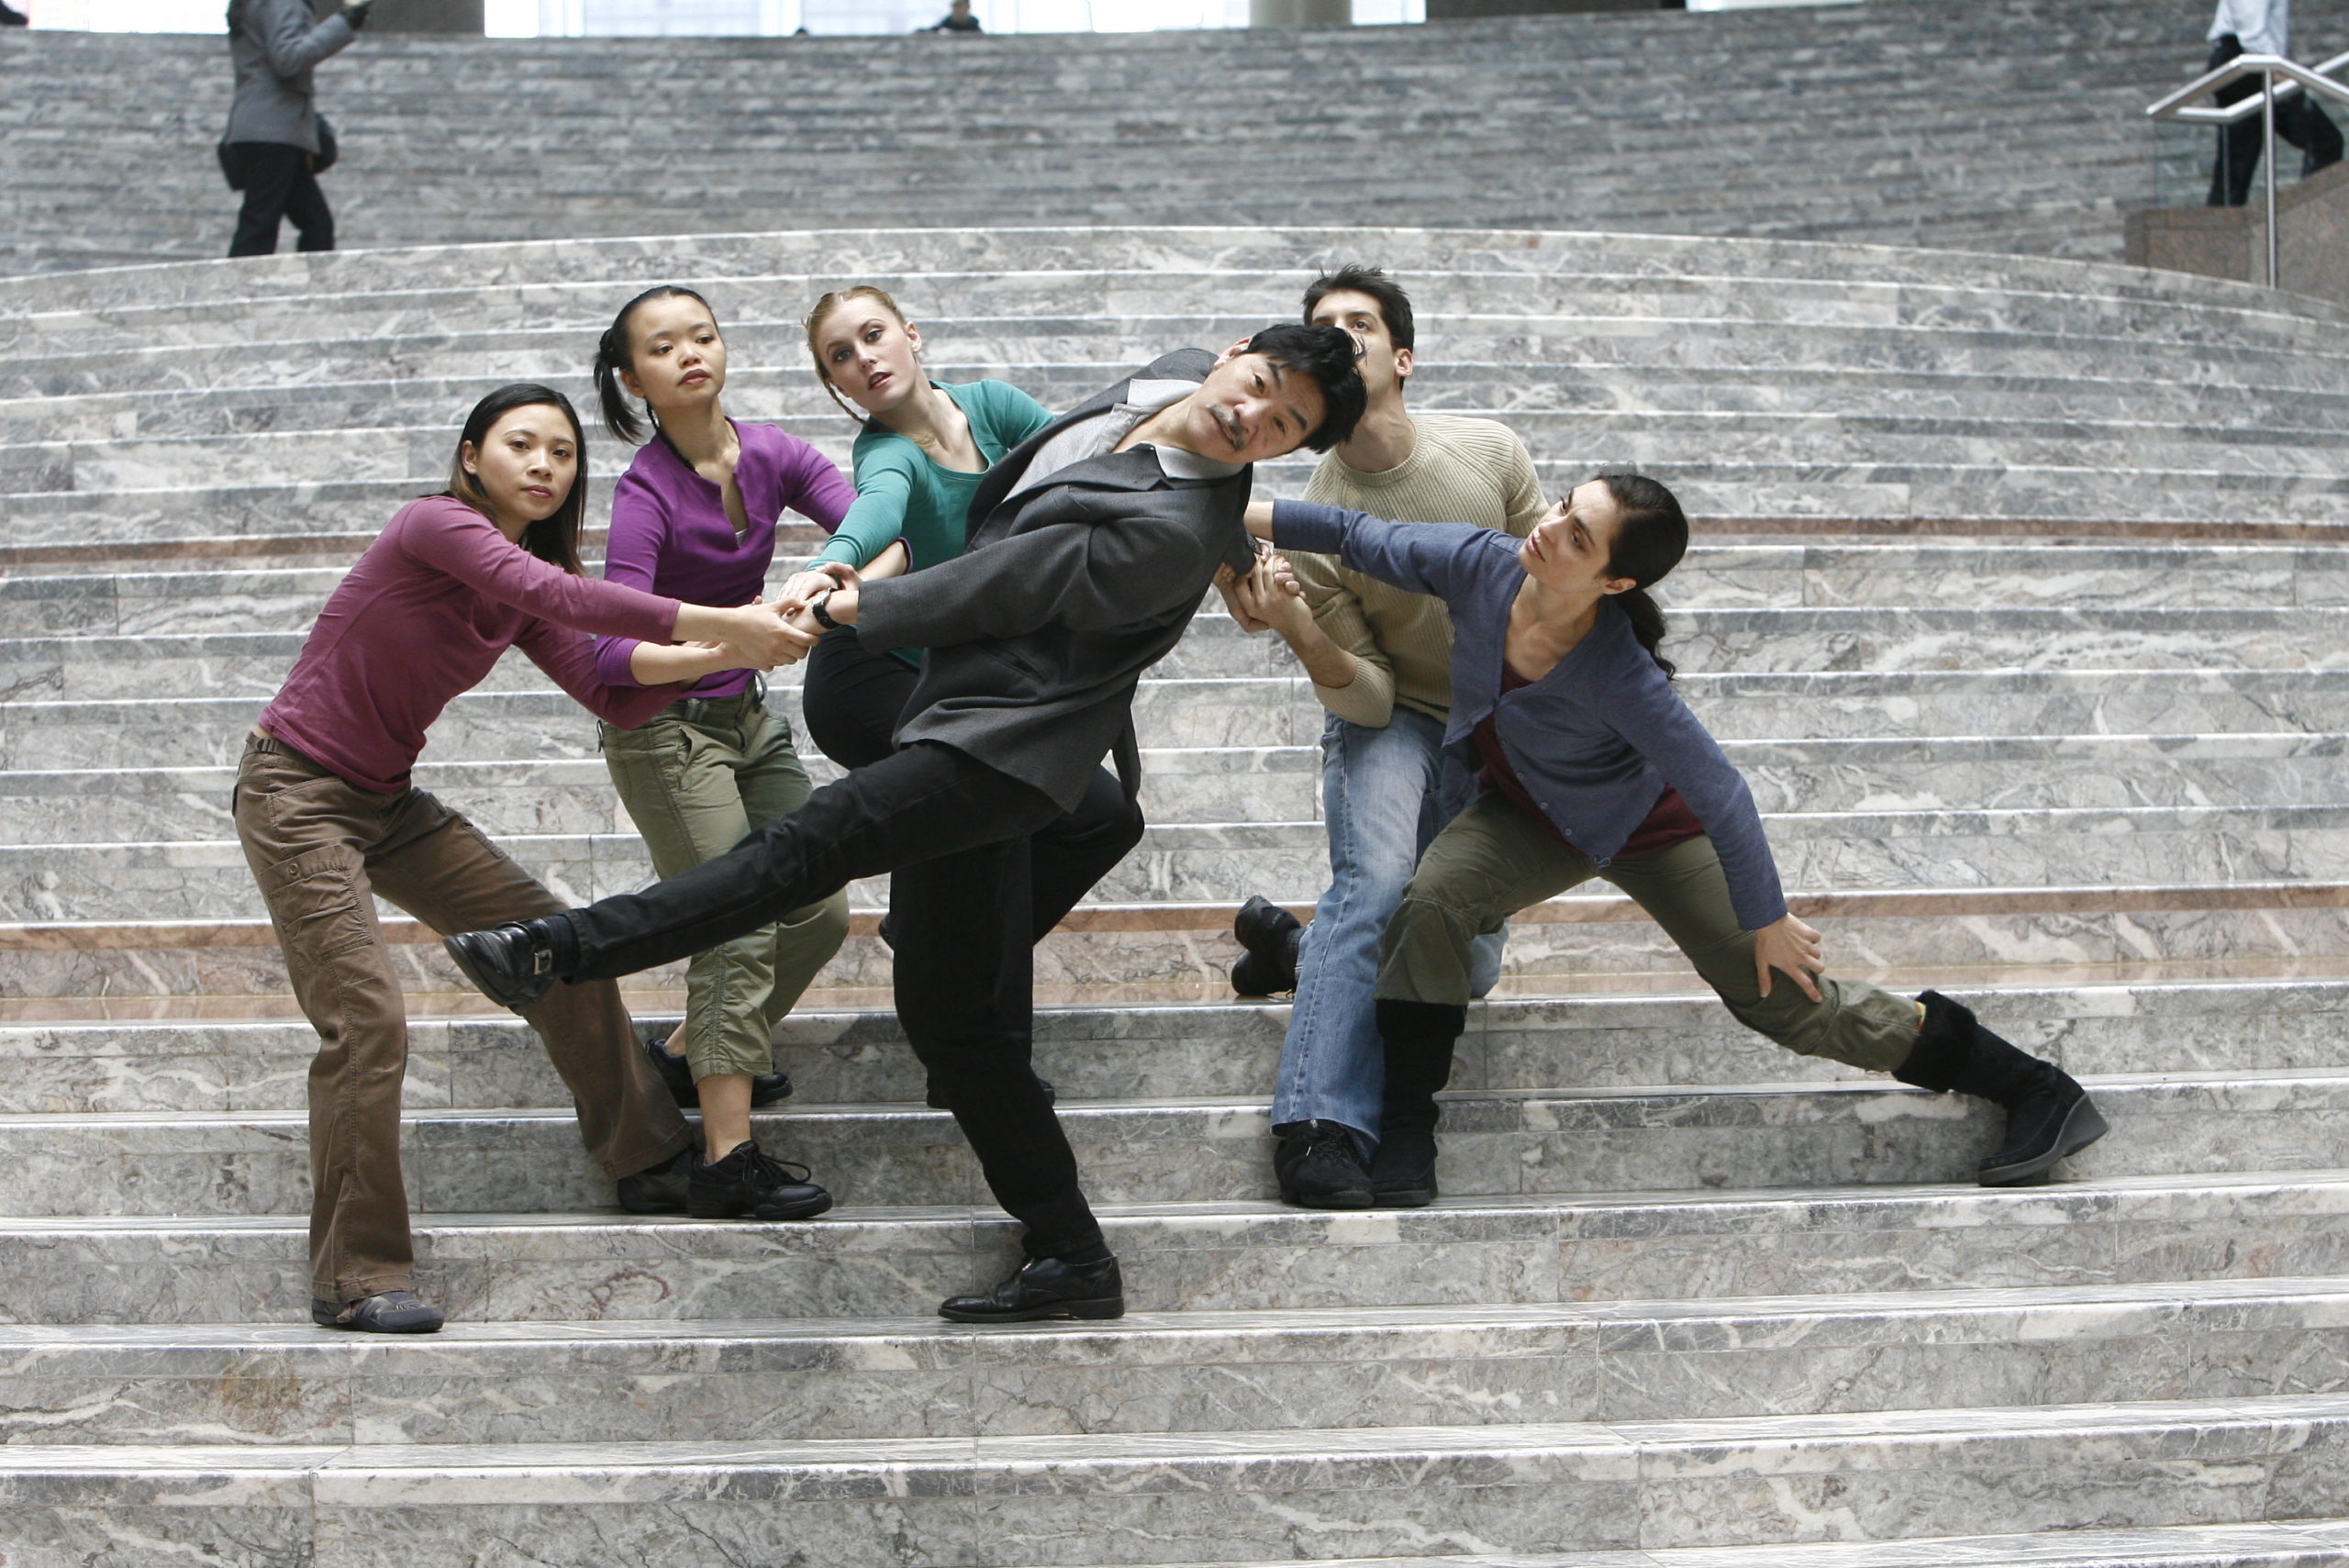 HT Chen is a middle-aged Asian man wearing a gray blazer and black pants. He leans back and is supported by five young dancers wearing muted colors, on the cement steps of the Winter Garden in New York City.